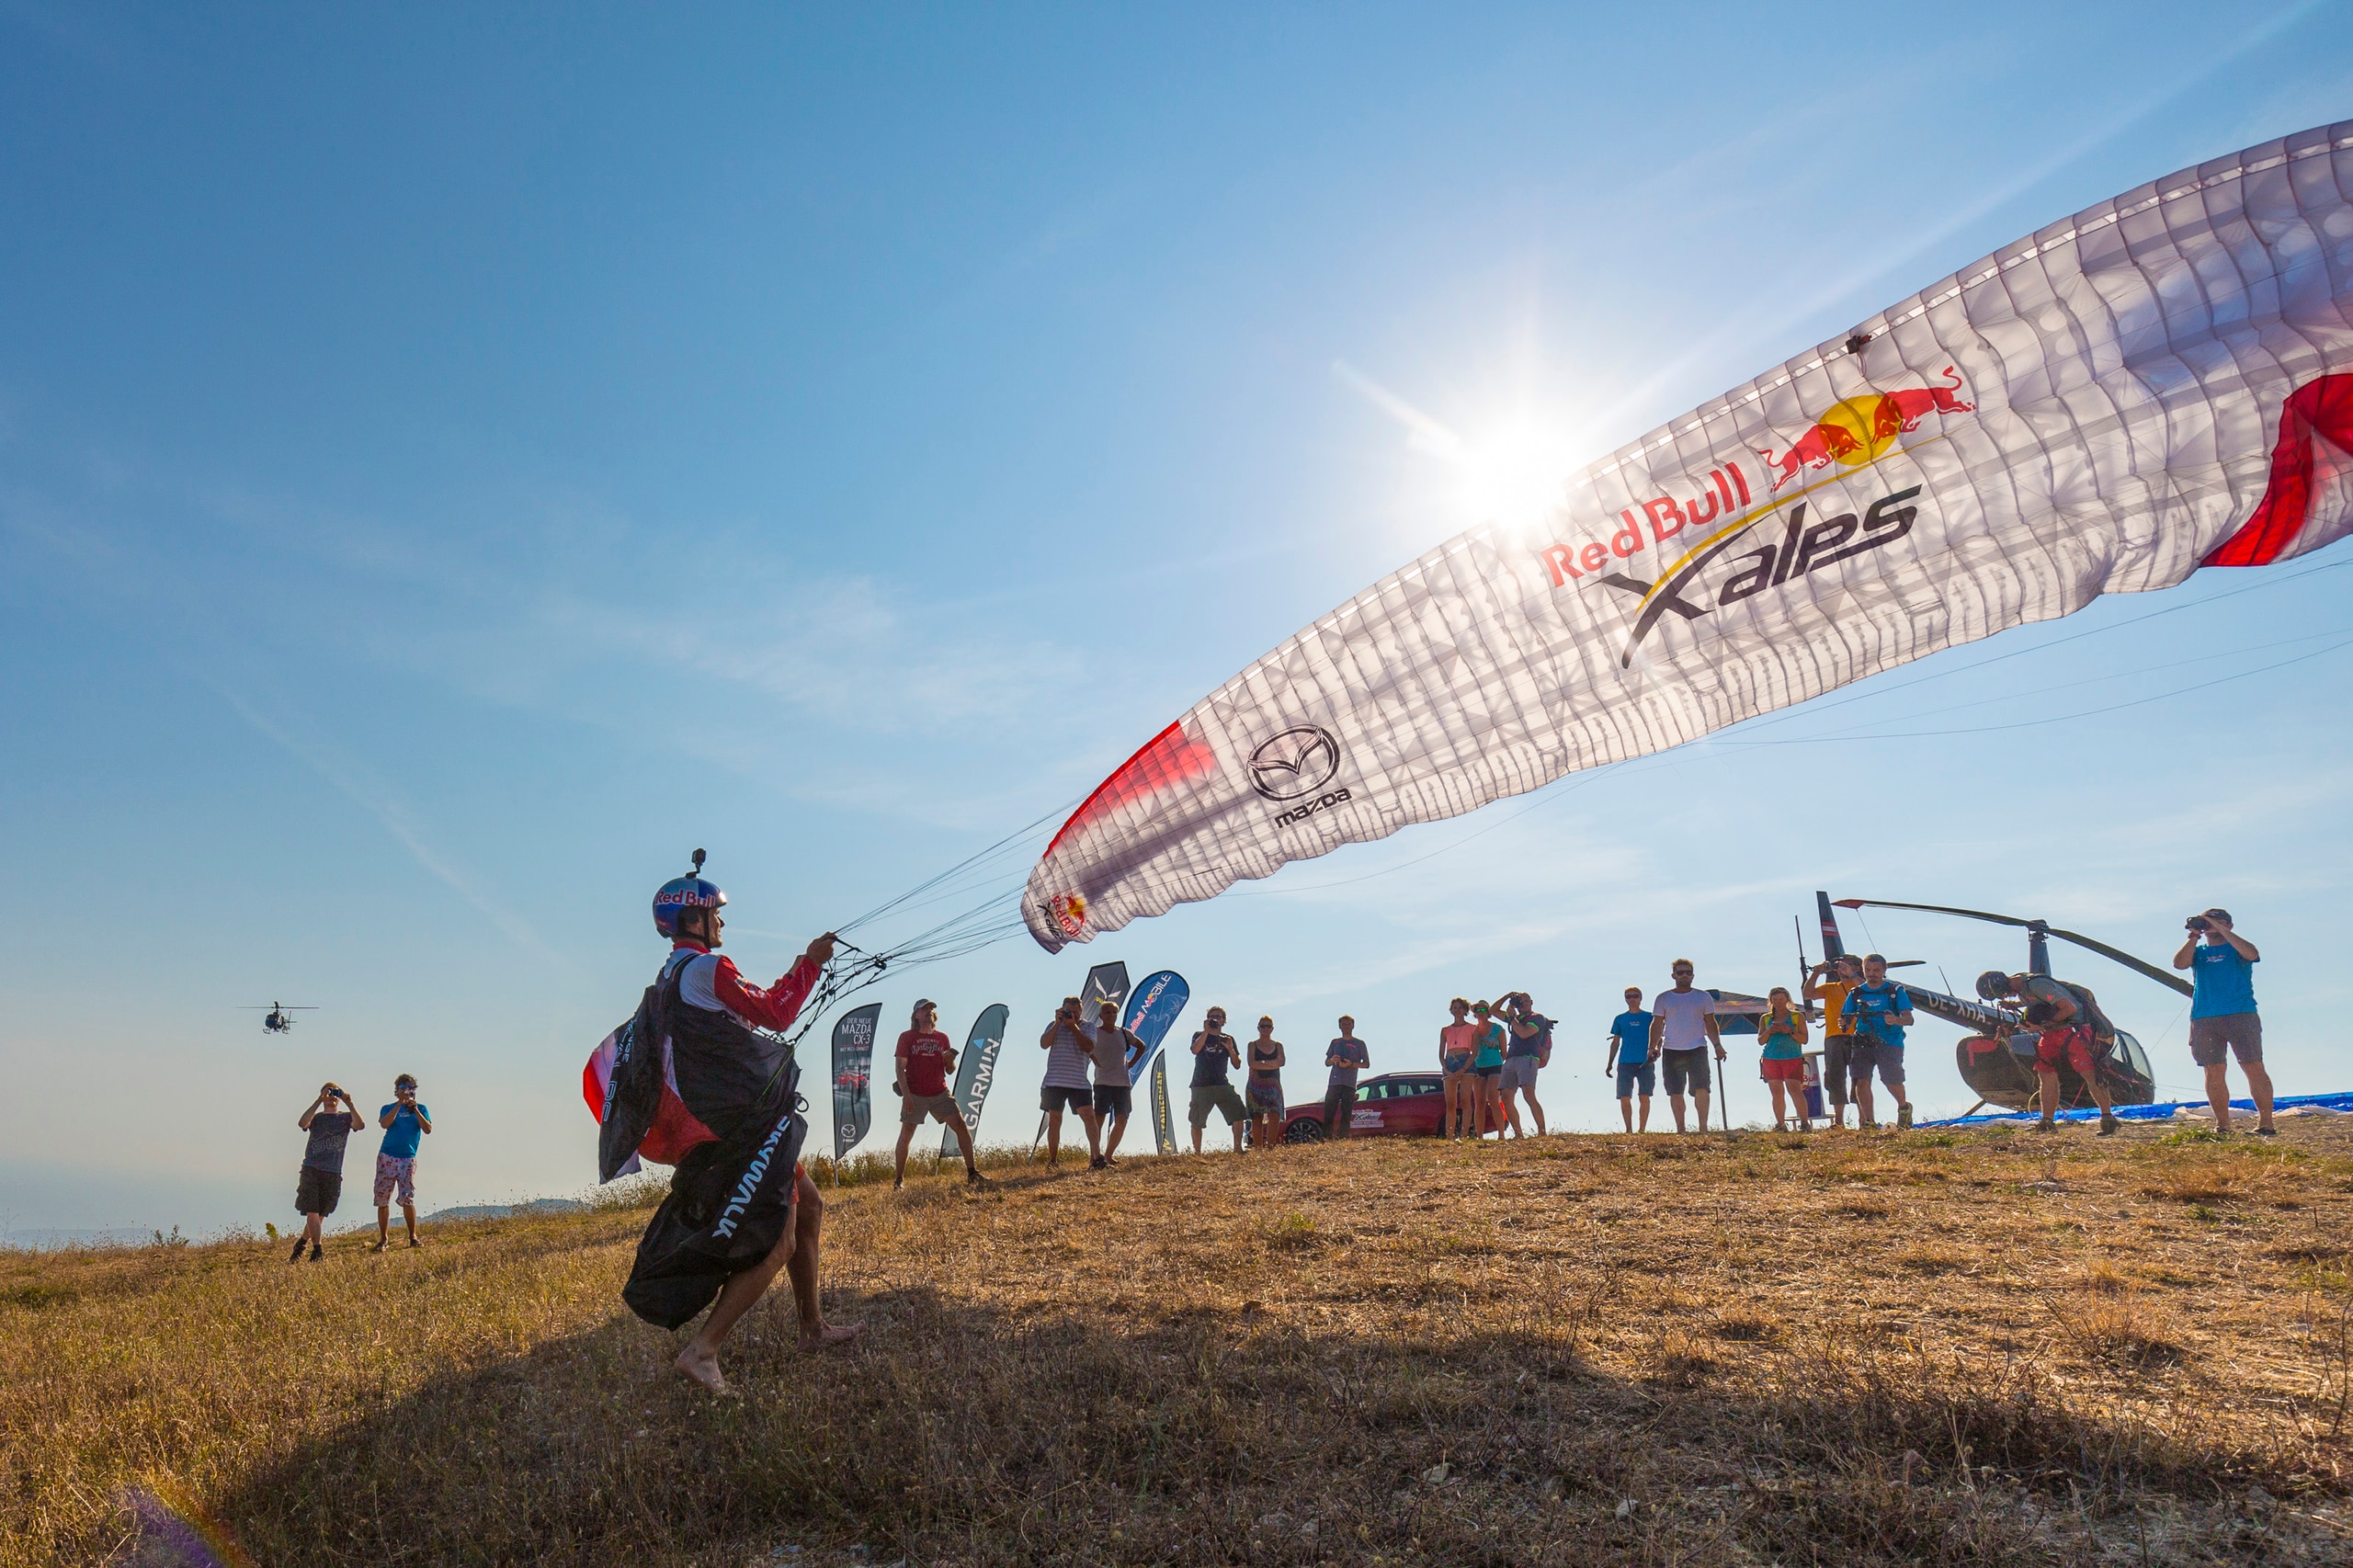 Paul Guschlbauer (AUT1) performs at the finish during the Red Bull X-Alps Peille, France on July 14th 2015